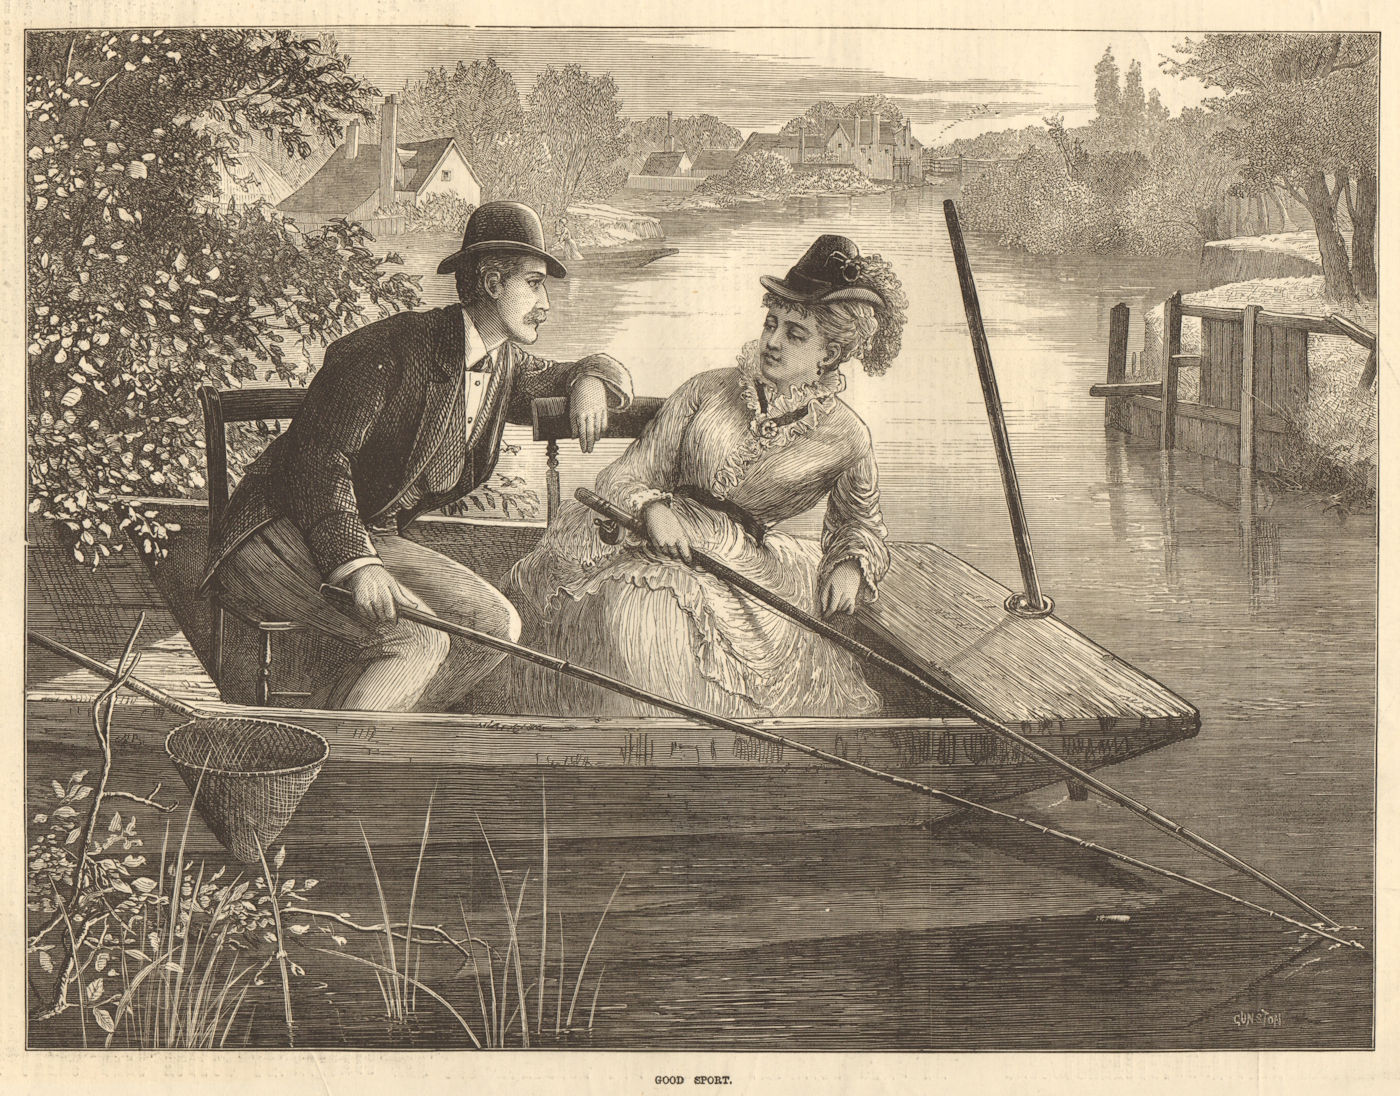 Associate Product Good sport. Romance. Boats 1874 antique ILN full page print